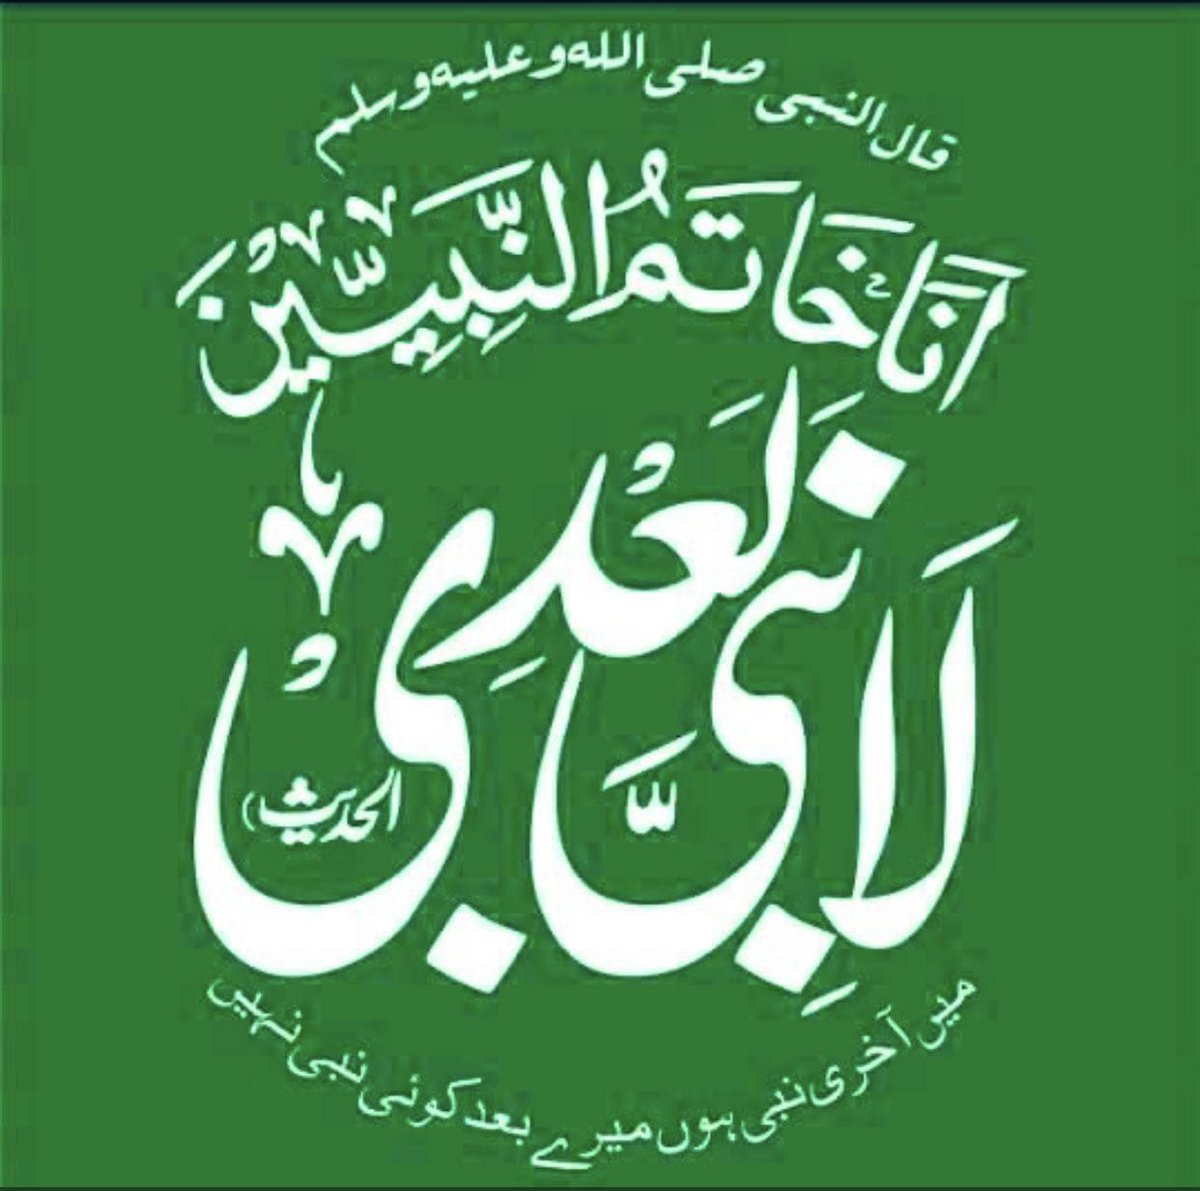 Saying of Ameerul-Mujahideen, may Allah have mercy on him We can sacrifice everything, but we can never compromise on the honor and dignity of the Holy Prophet ﷺ #FaezIsa_RevertProQadyaniDecision